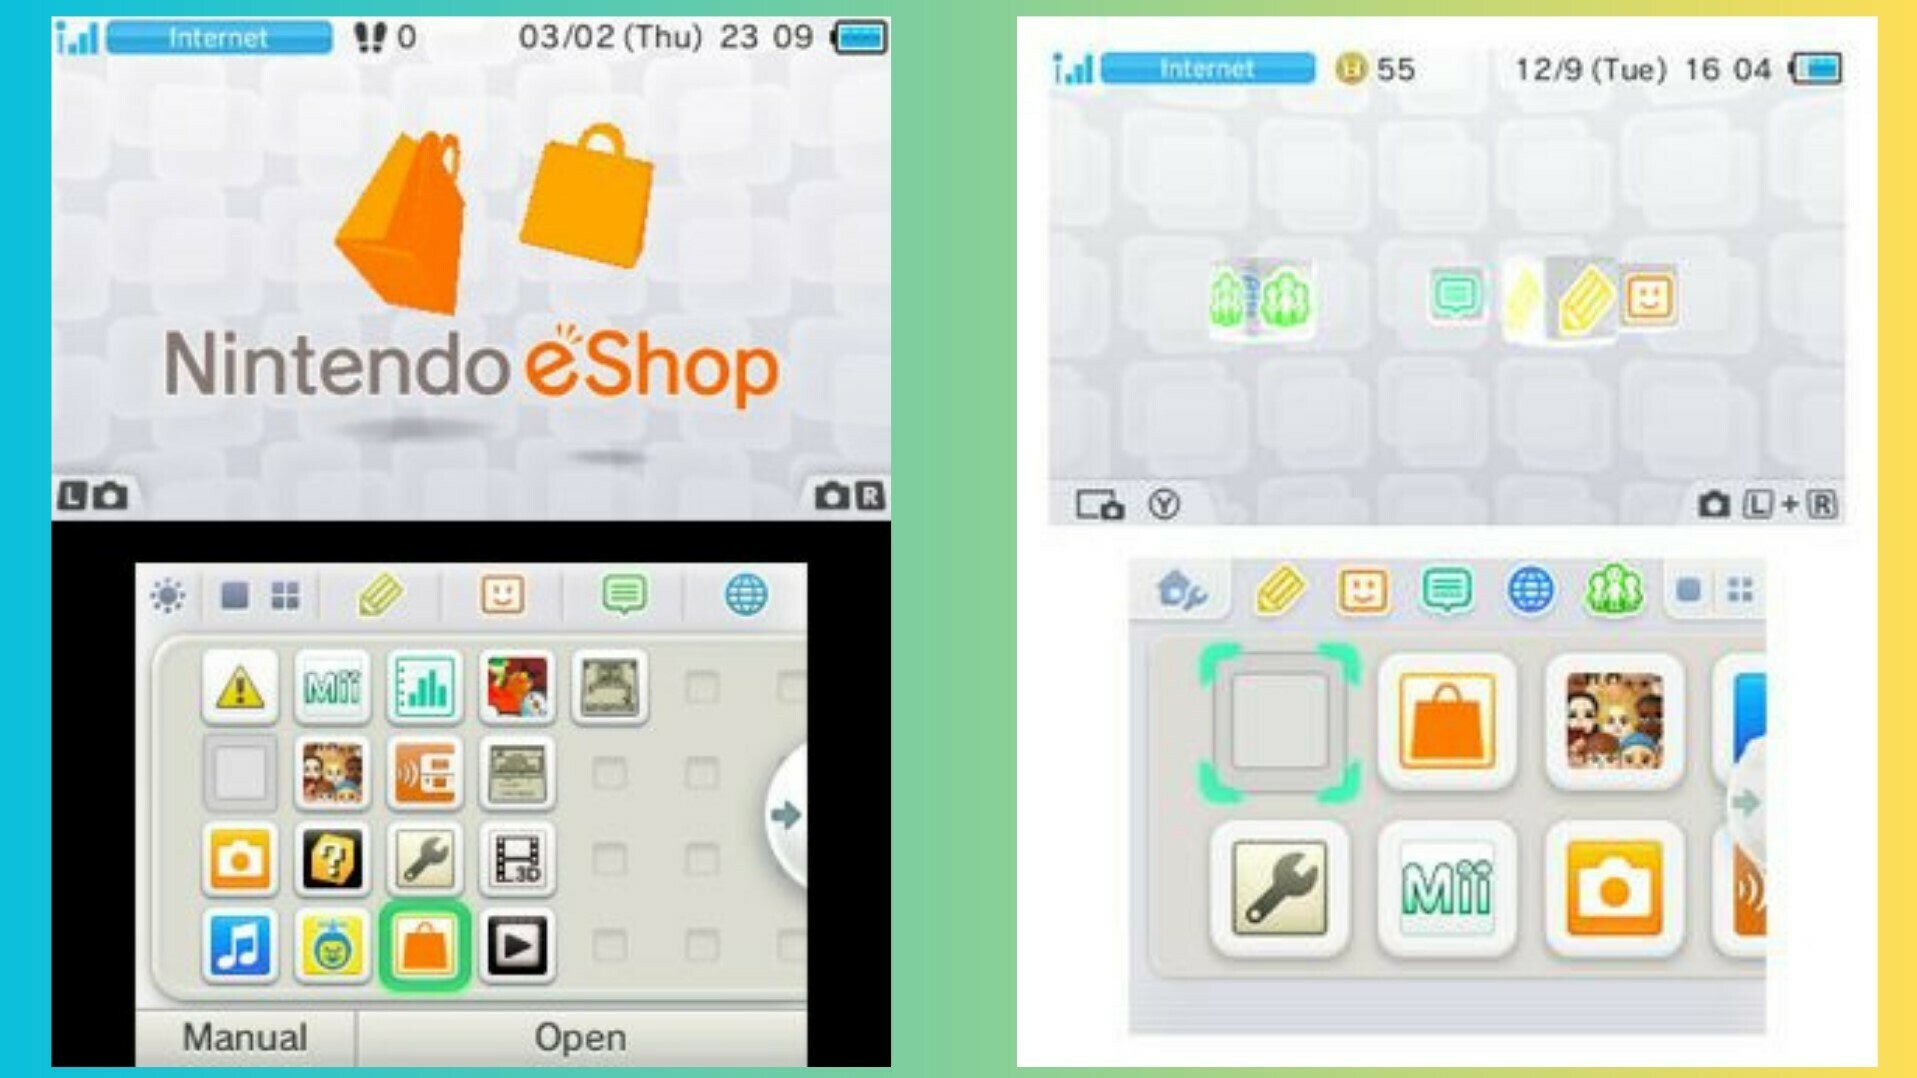 Reminder: The Wii U and 3DS eShops Close in Less Than 2 Weeks